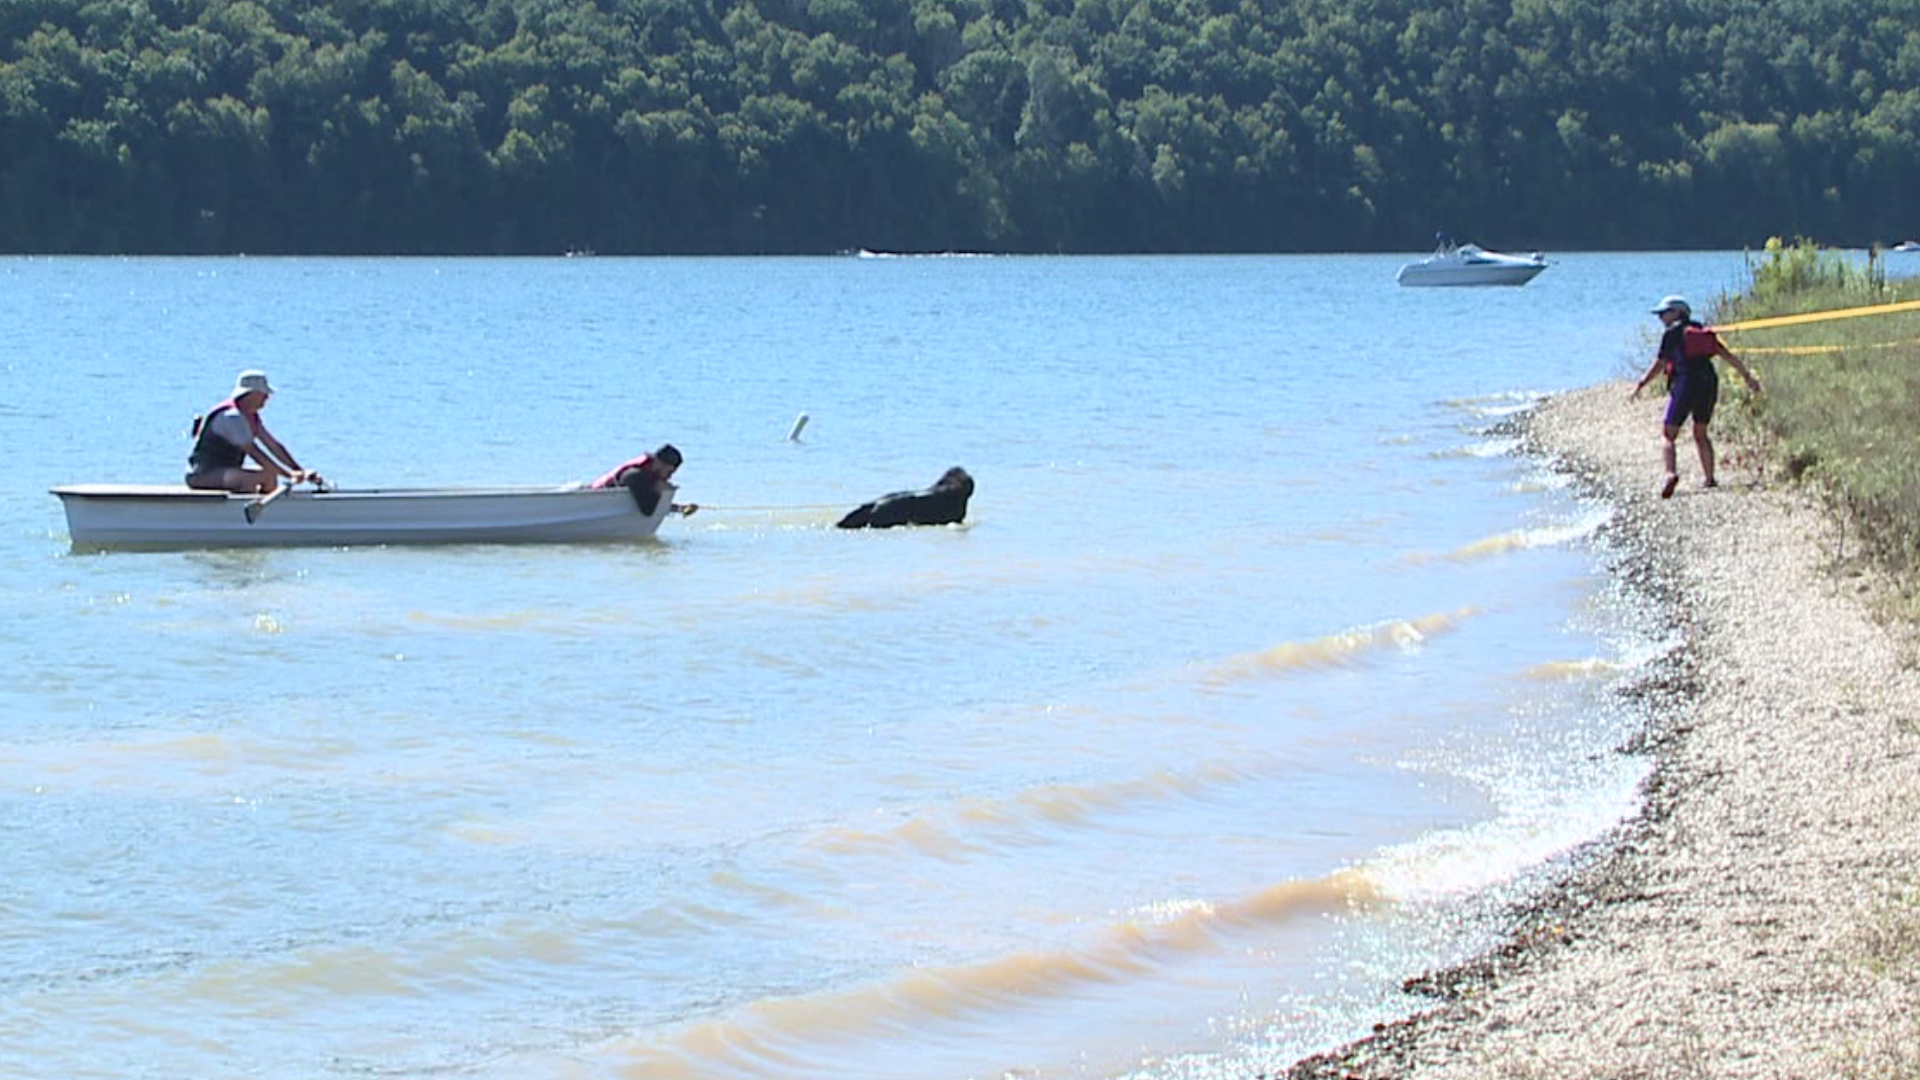 The Newfoundland Club of America ran water tests with dogs at Beltzville State Park.